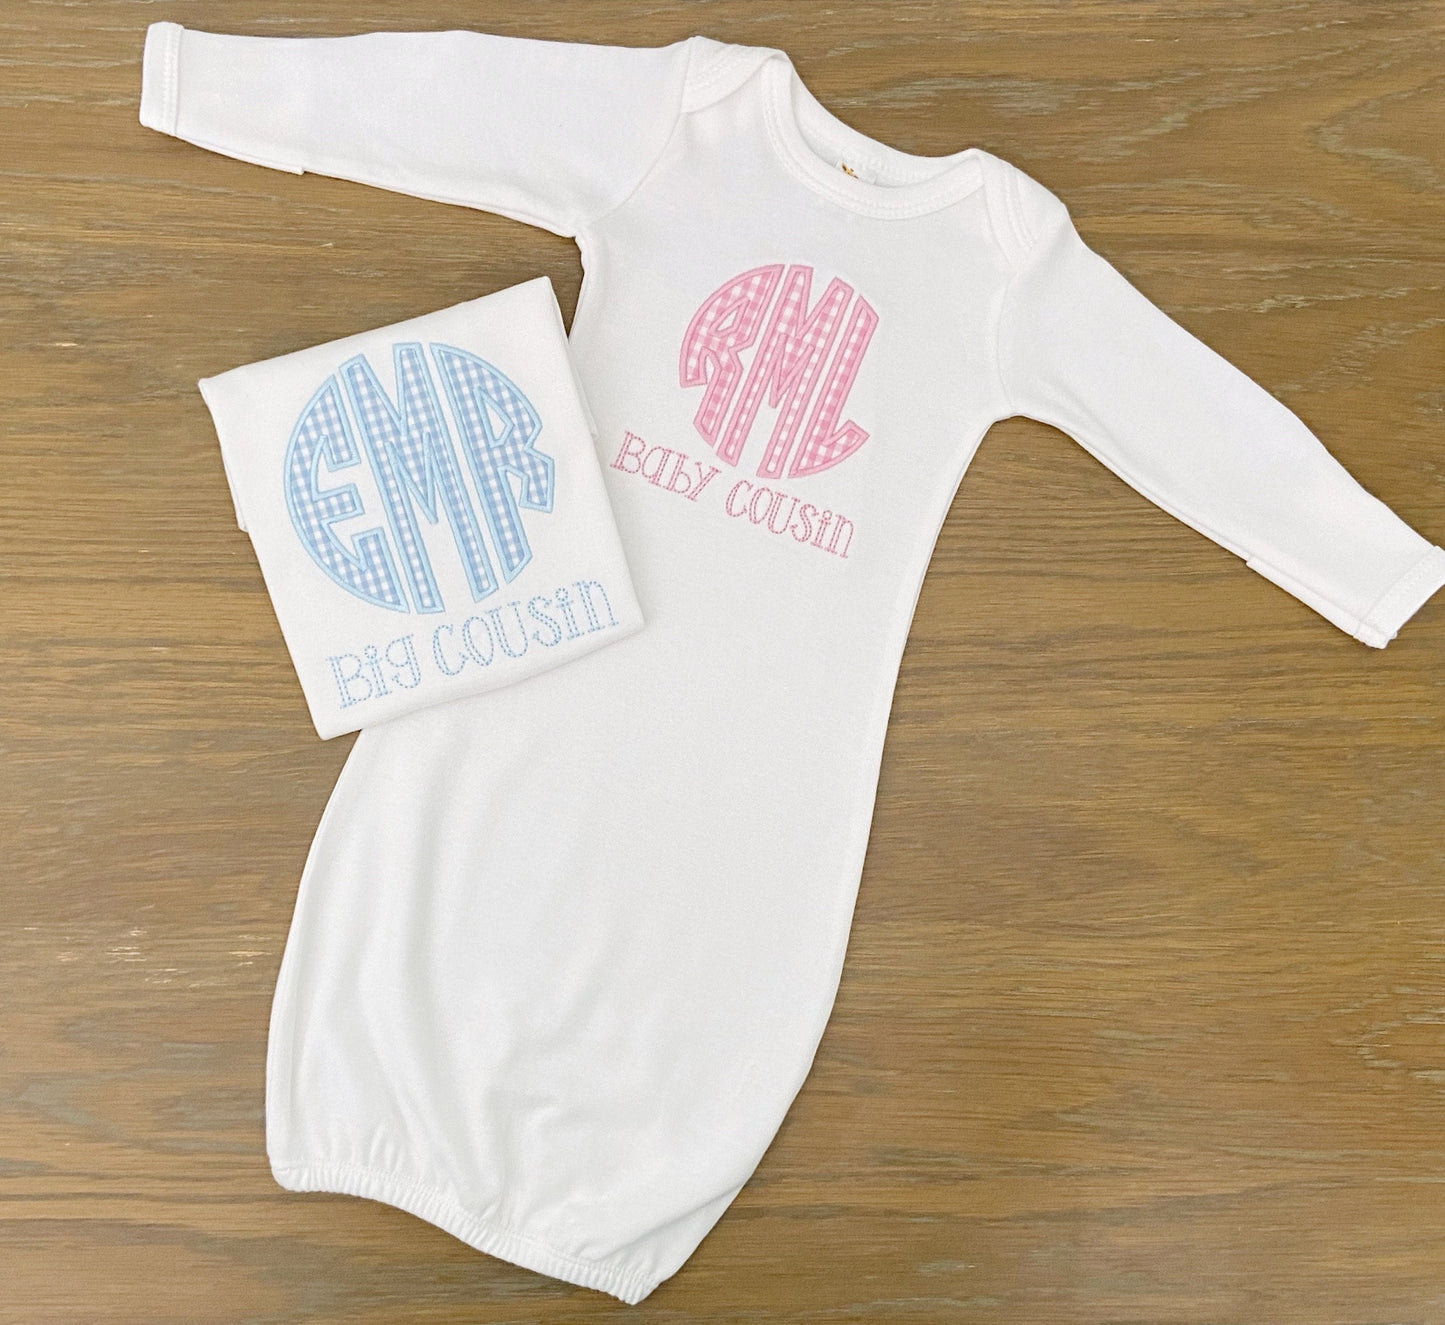 Matching Cousin Shirts - Personalized Applique Shirt - Monogrammed Baby Gown - Cousin Baby Gown - Matching Sibling Shirts